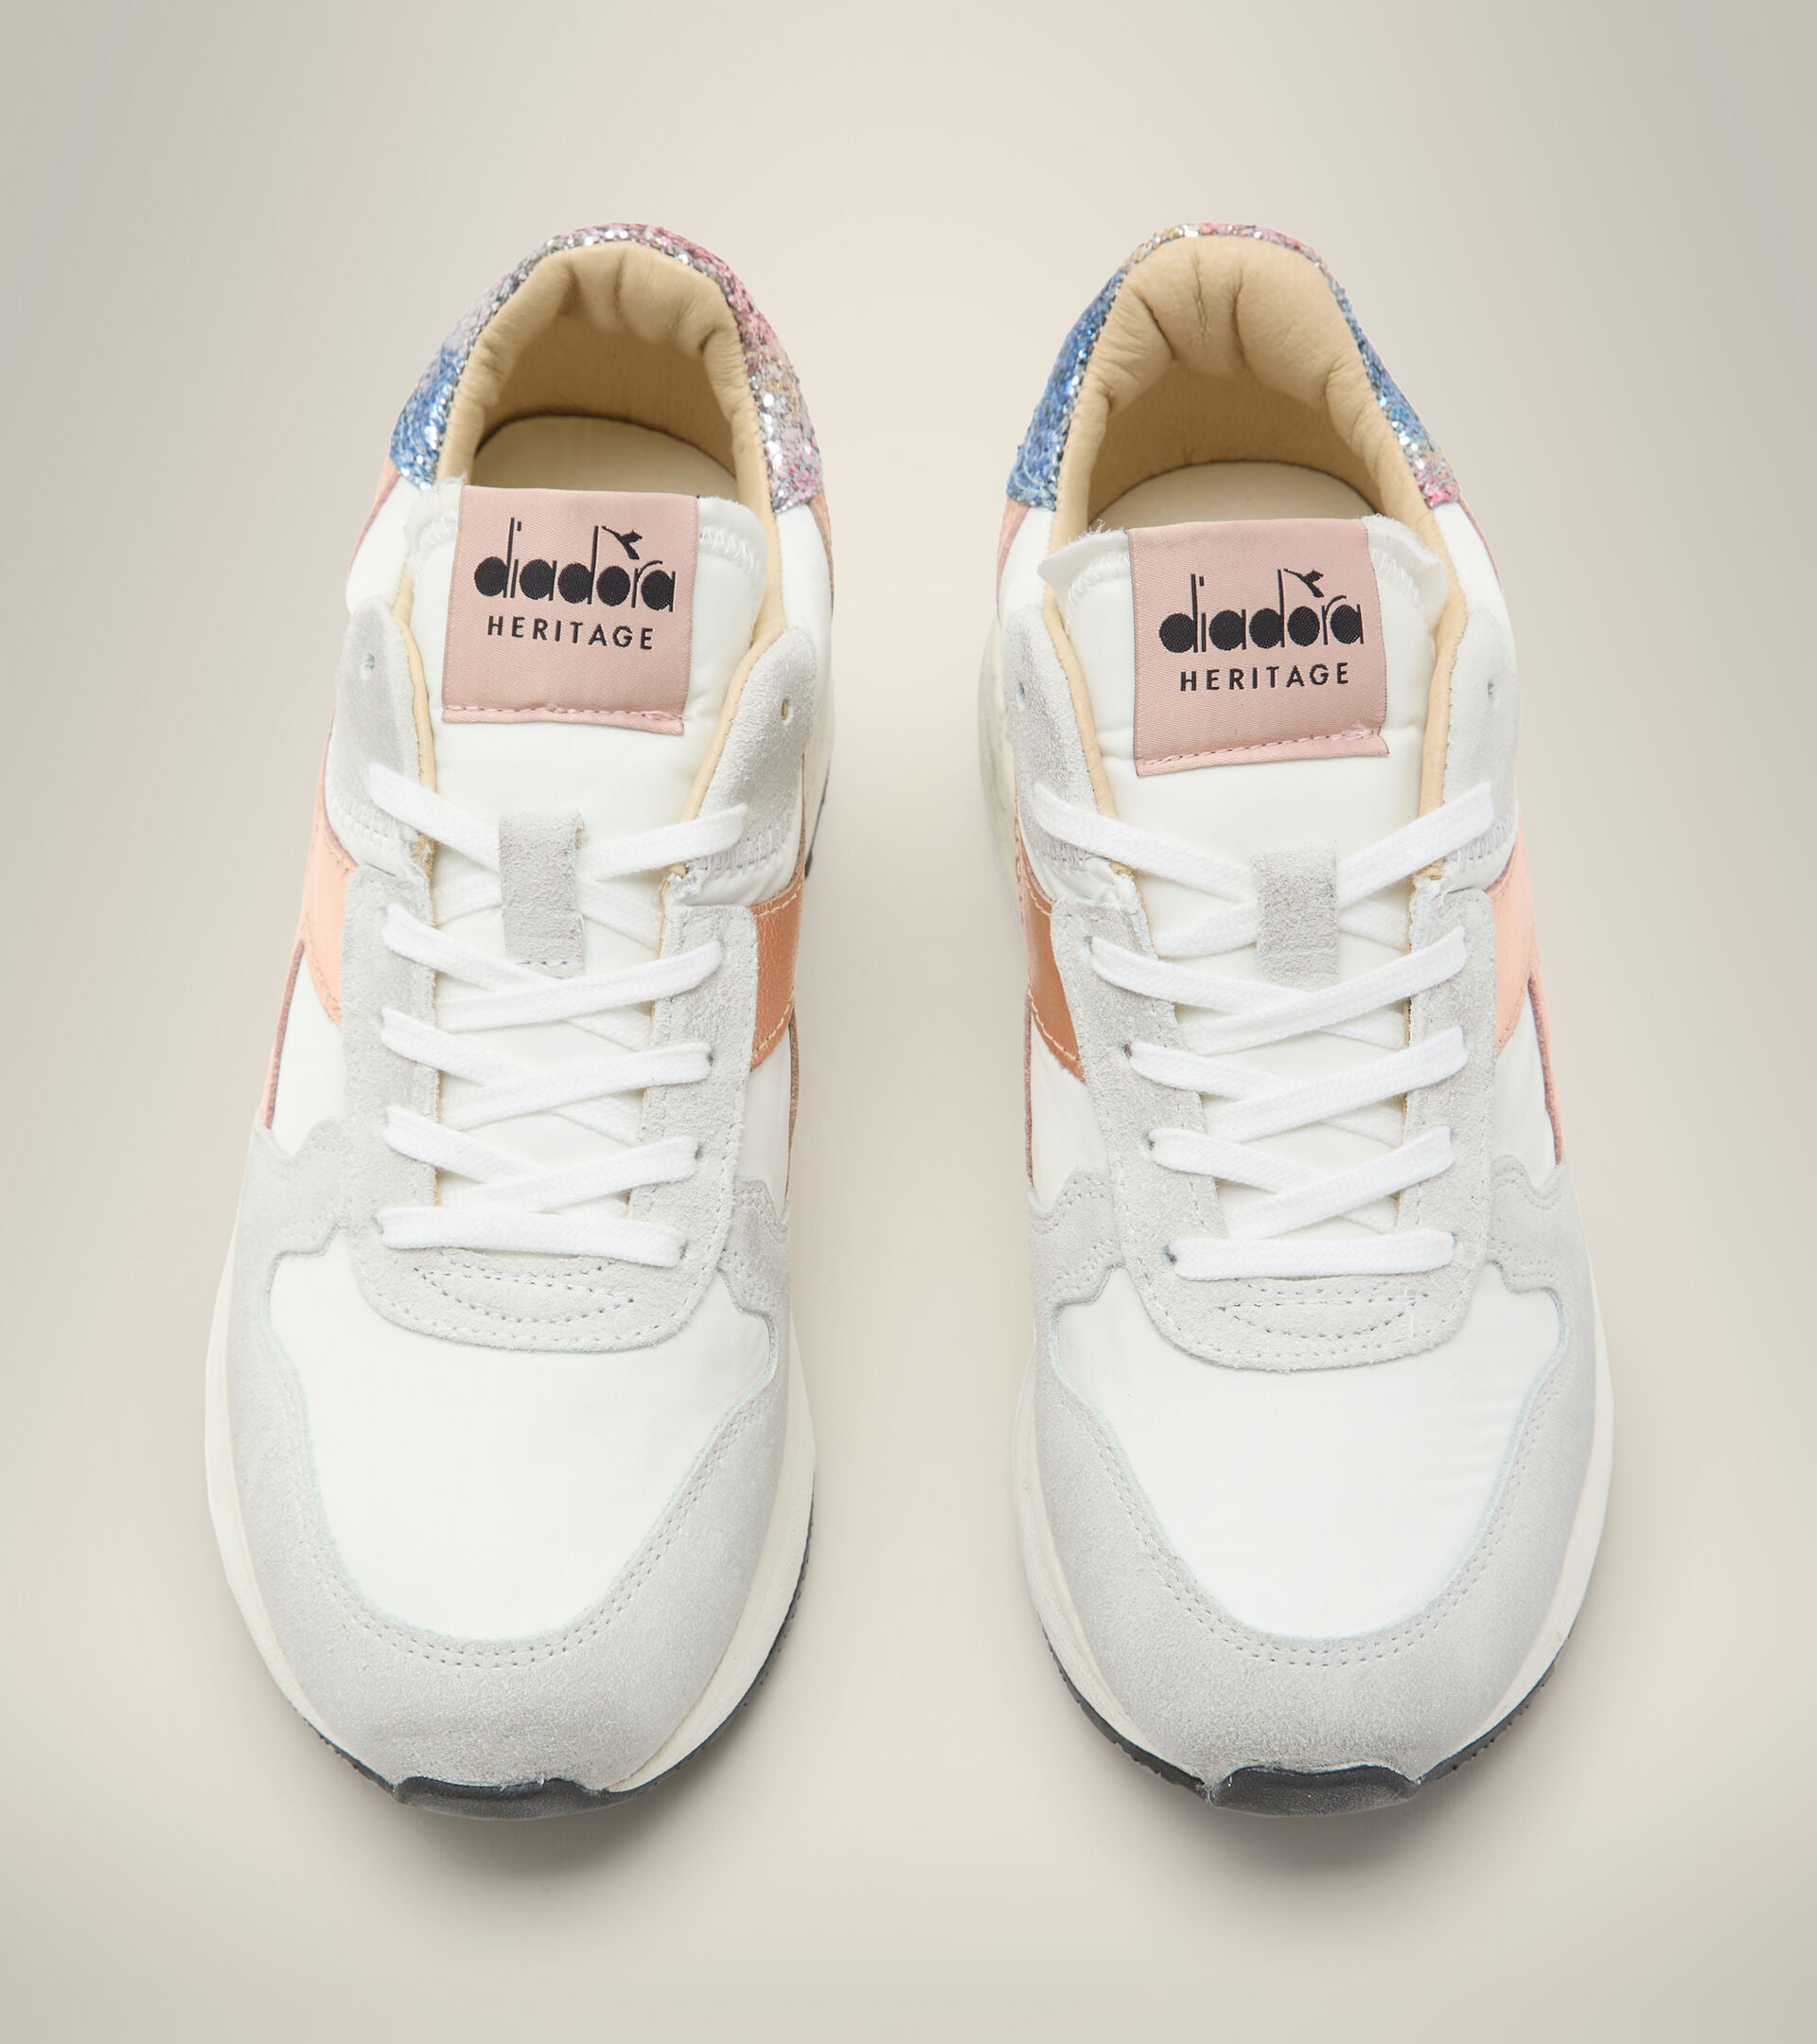 The finest materials and meticulous attention to detail make the women's Venus Iris Dirty a unique pair of trainers, designed to be worn during sports or for a casual drink.